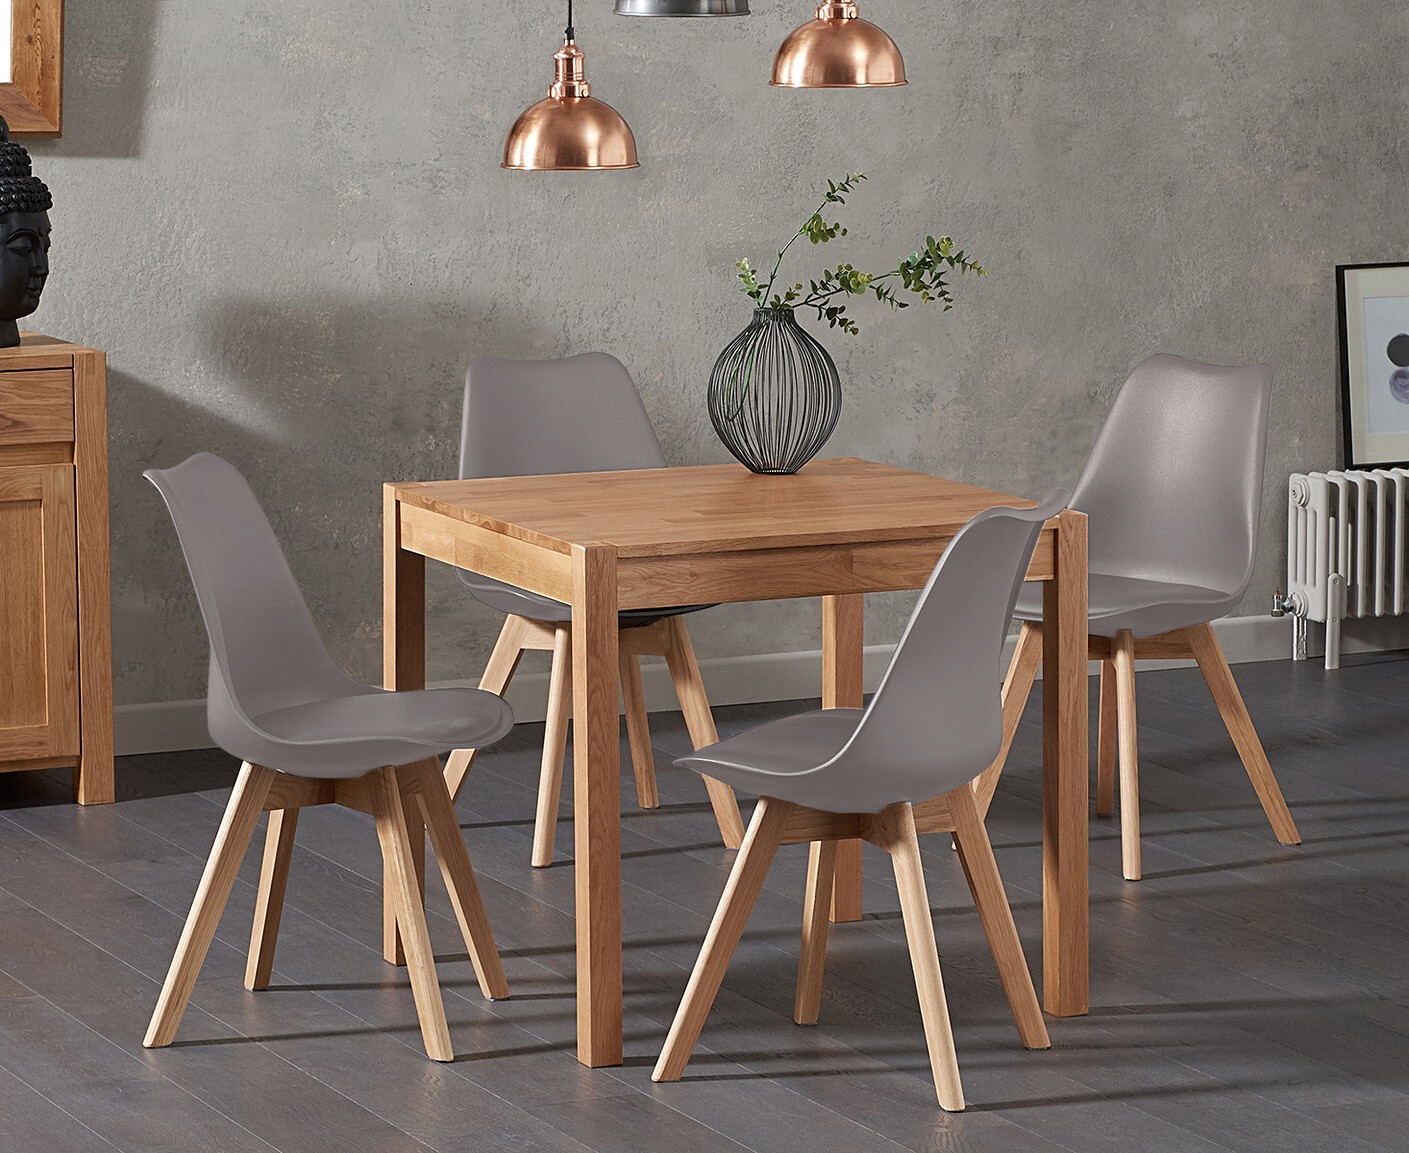 Photo 3 of York 80cm solid oak dining table with 2 dark grey orson chairs